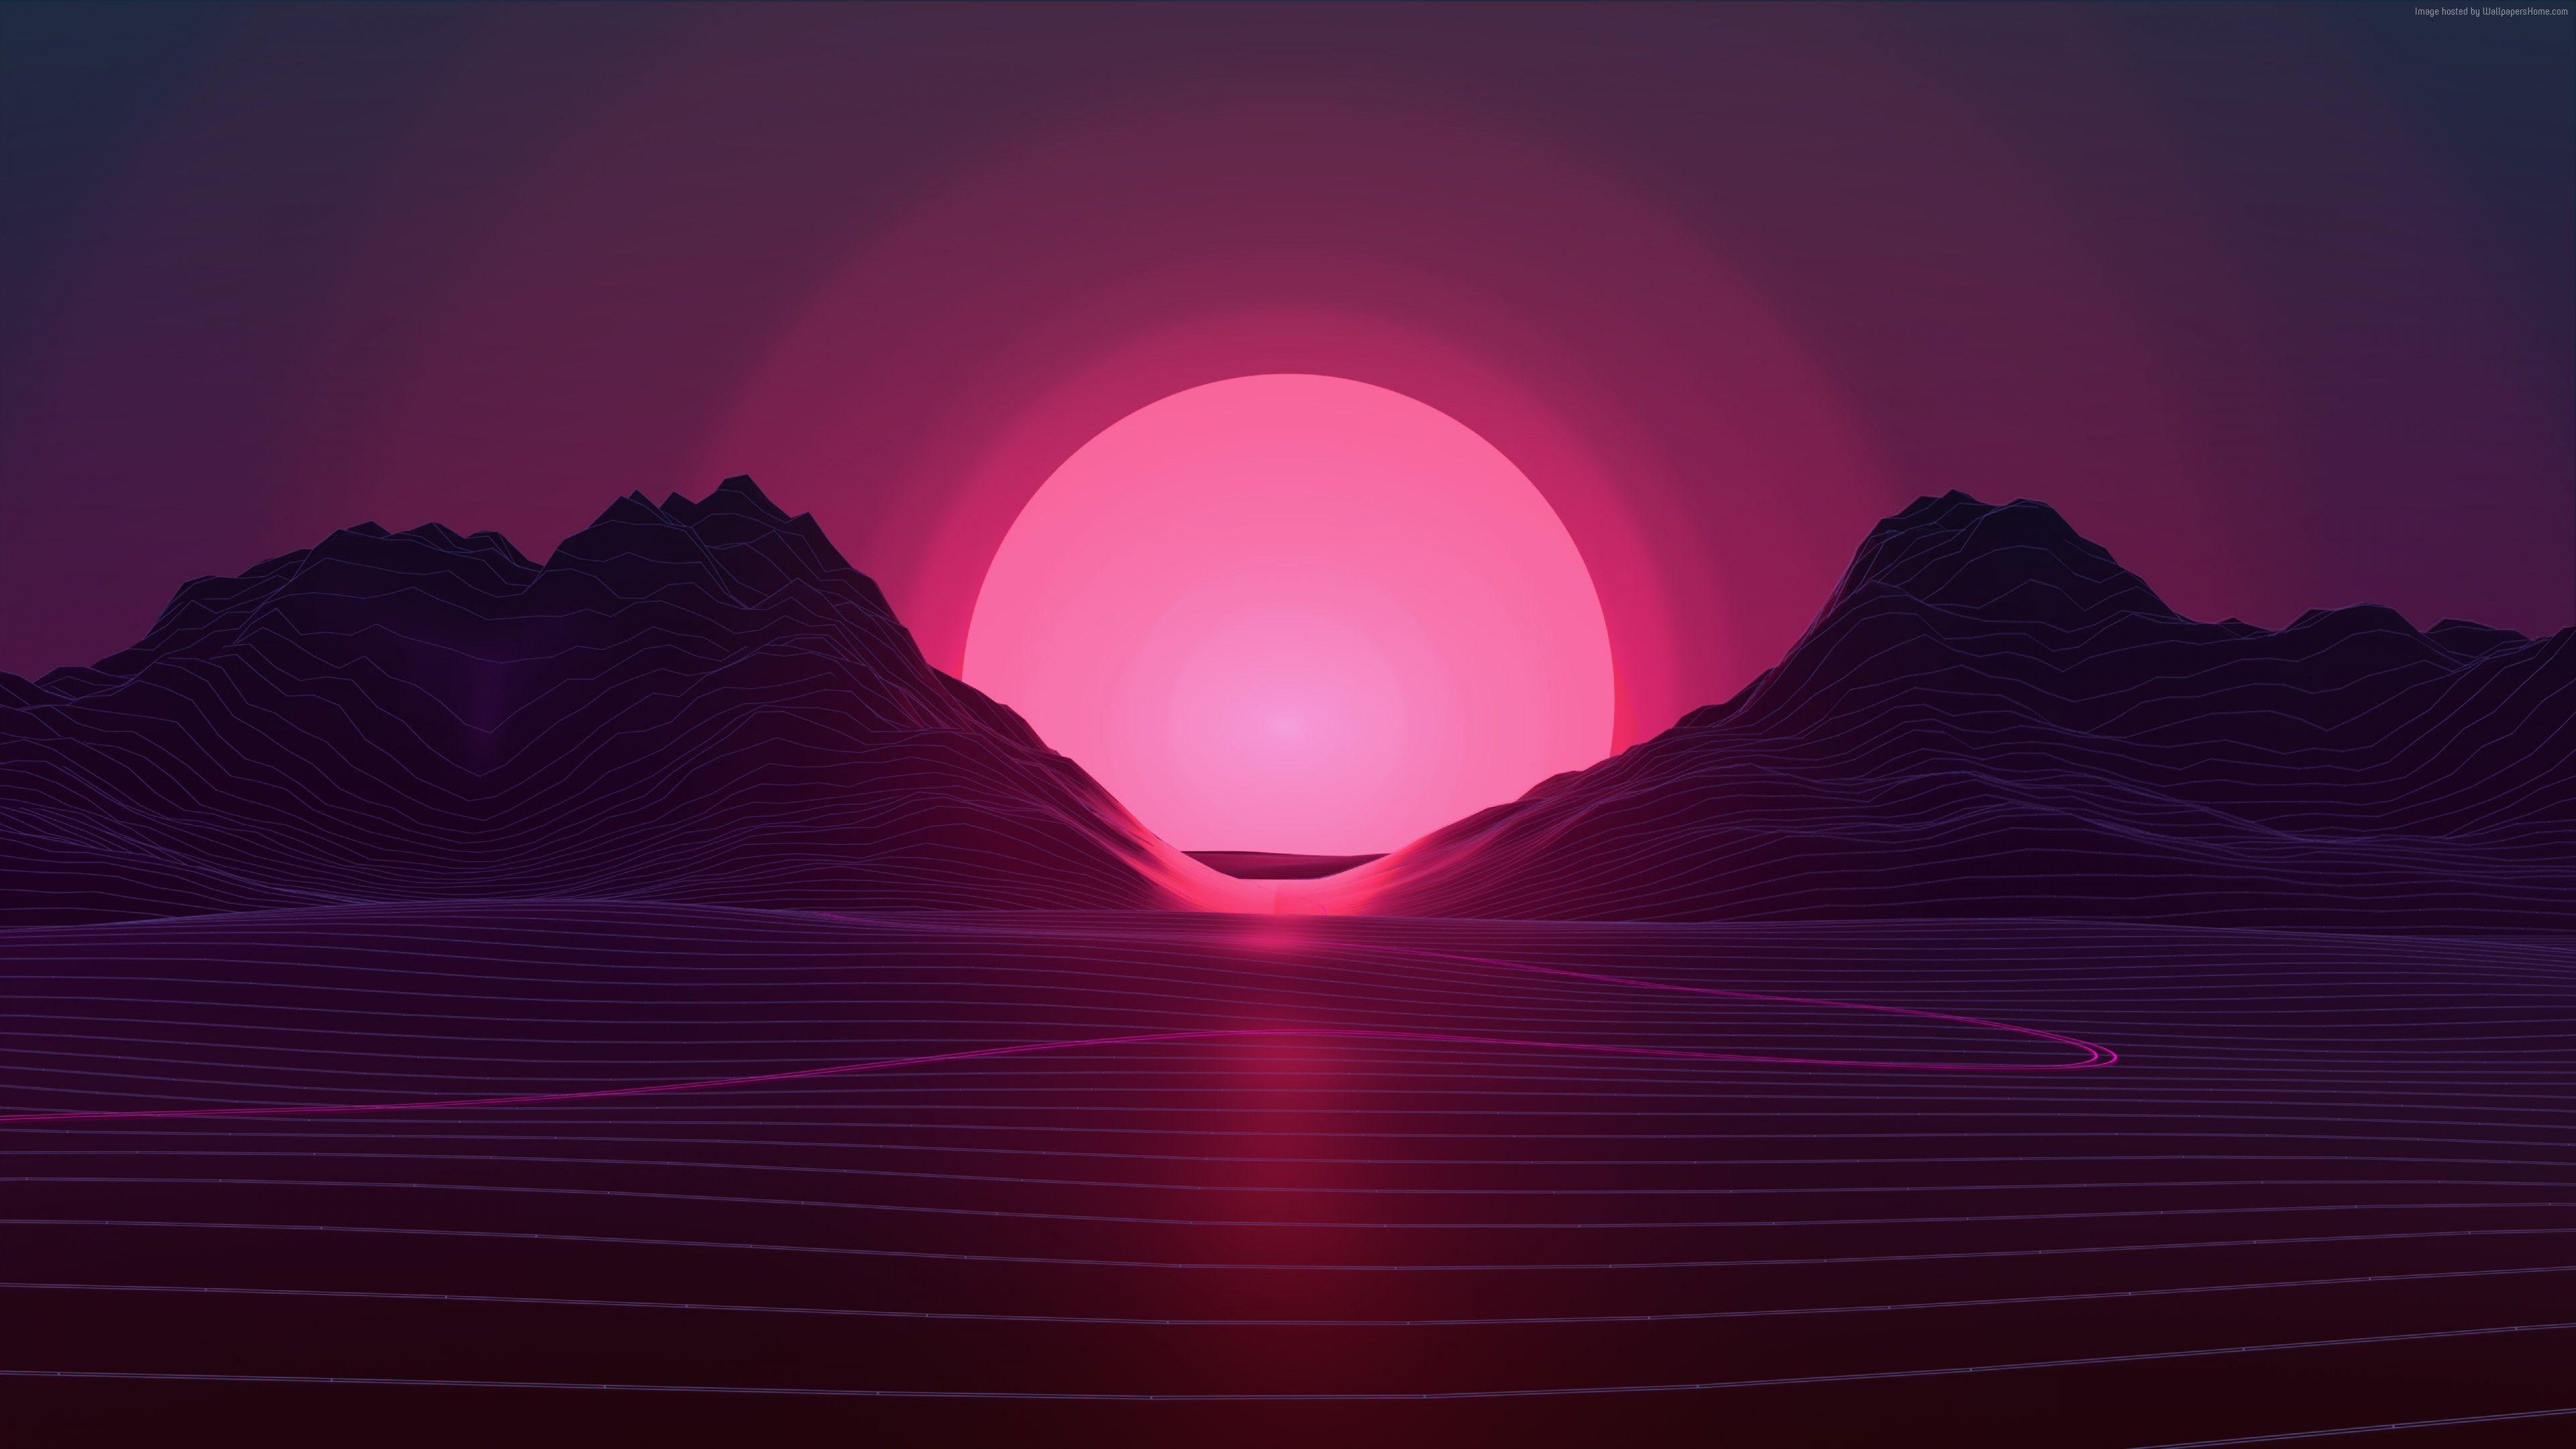 Wallpaper Retrowave, Lines, Sunset, 4K, Abstract Abstract Wallpaper Retrowave. Vaporwave Wallpaper, Neon Wallpaper, Sunset Wallpaper